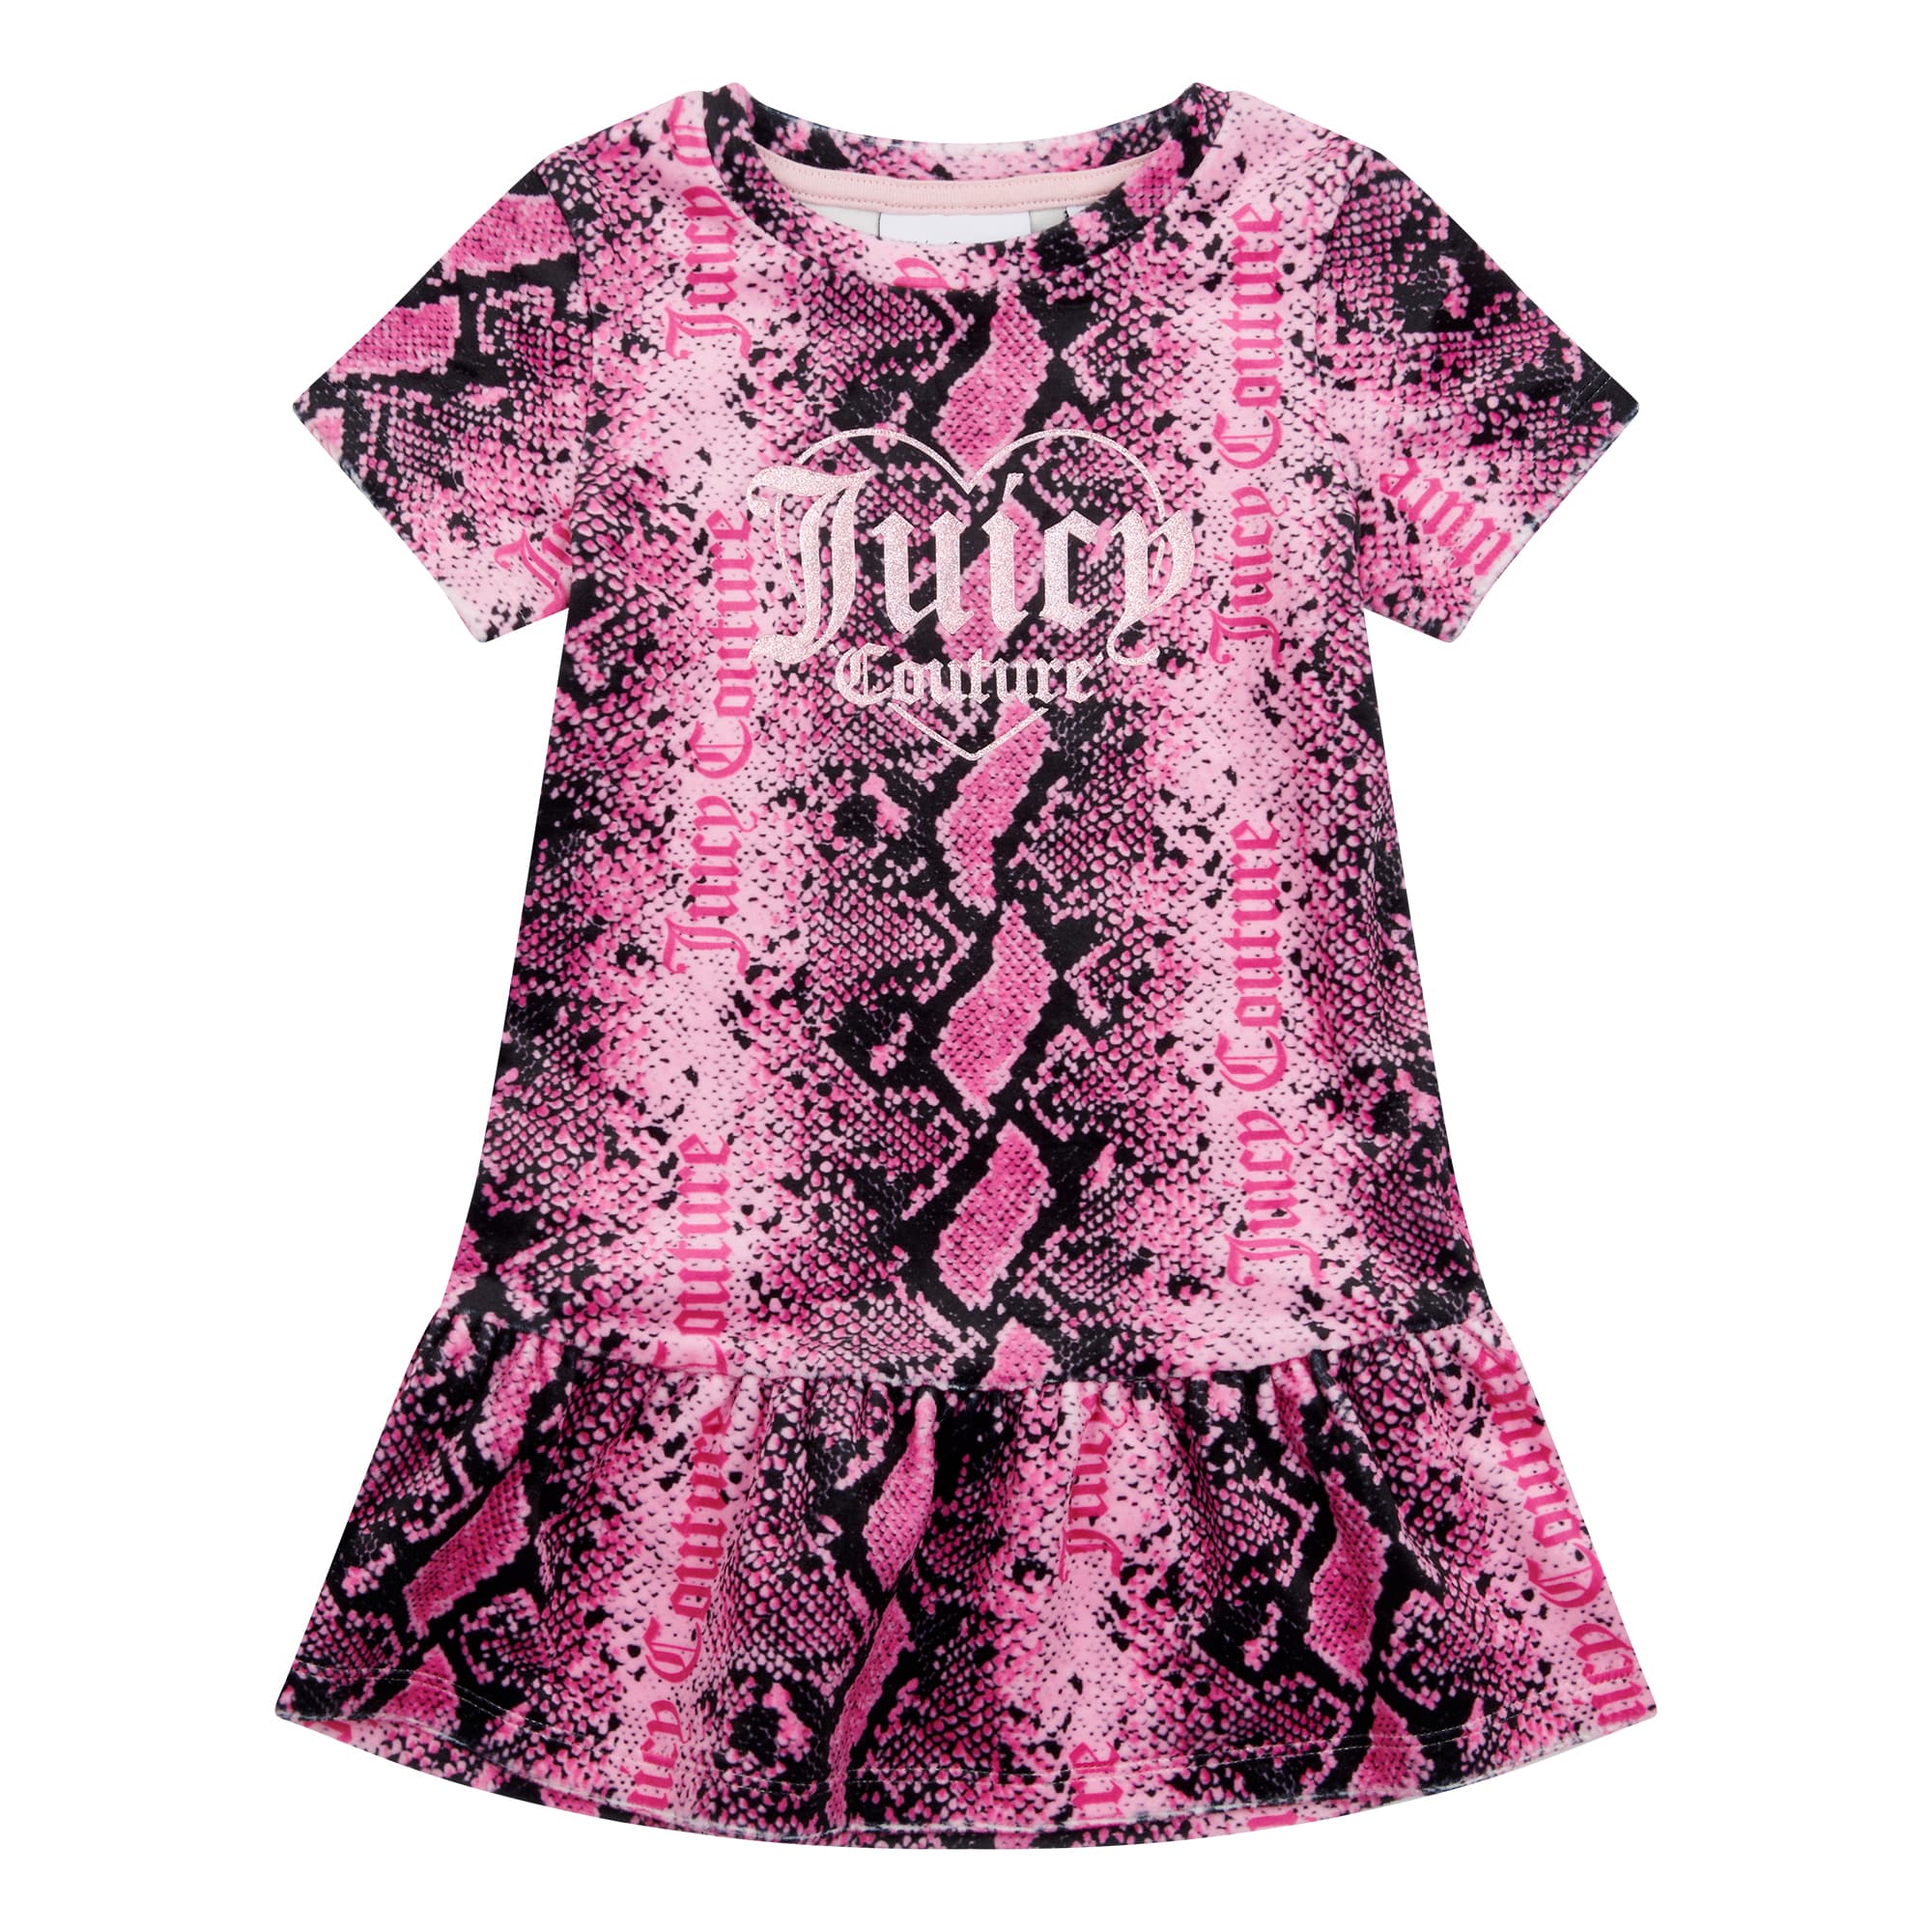 Juicy Couture snakeskin pink girls dress front view